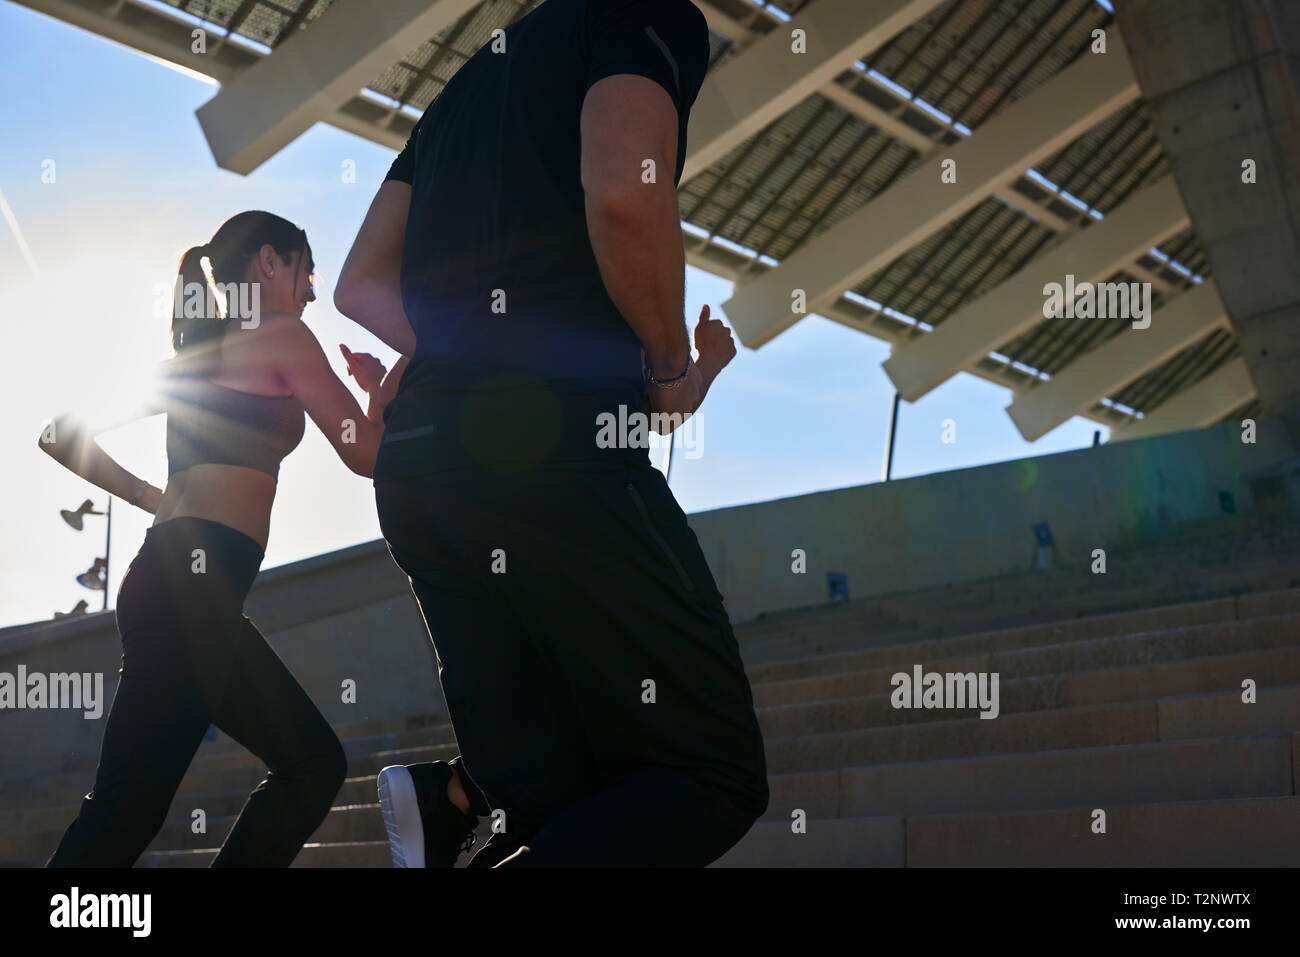 Friends jogging up steps in sports stadium Stock Photo